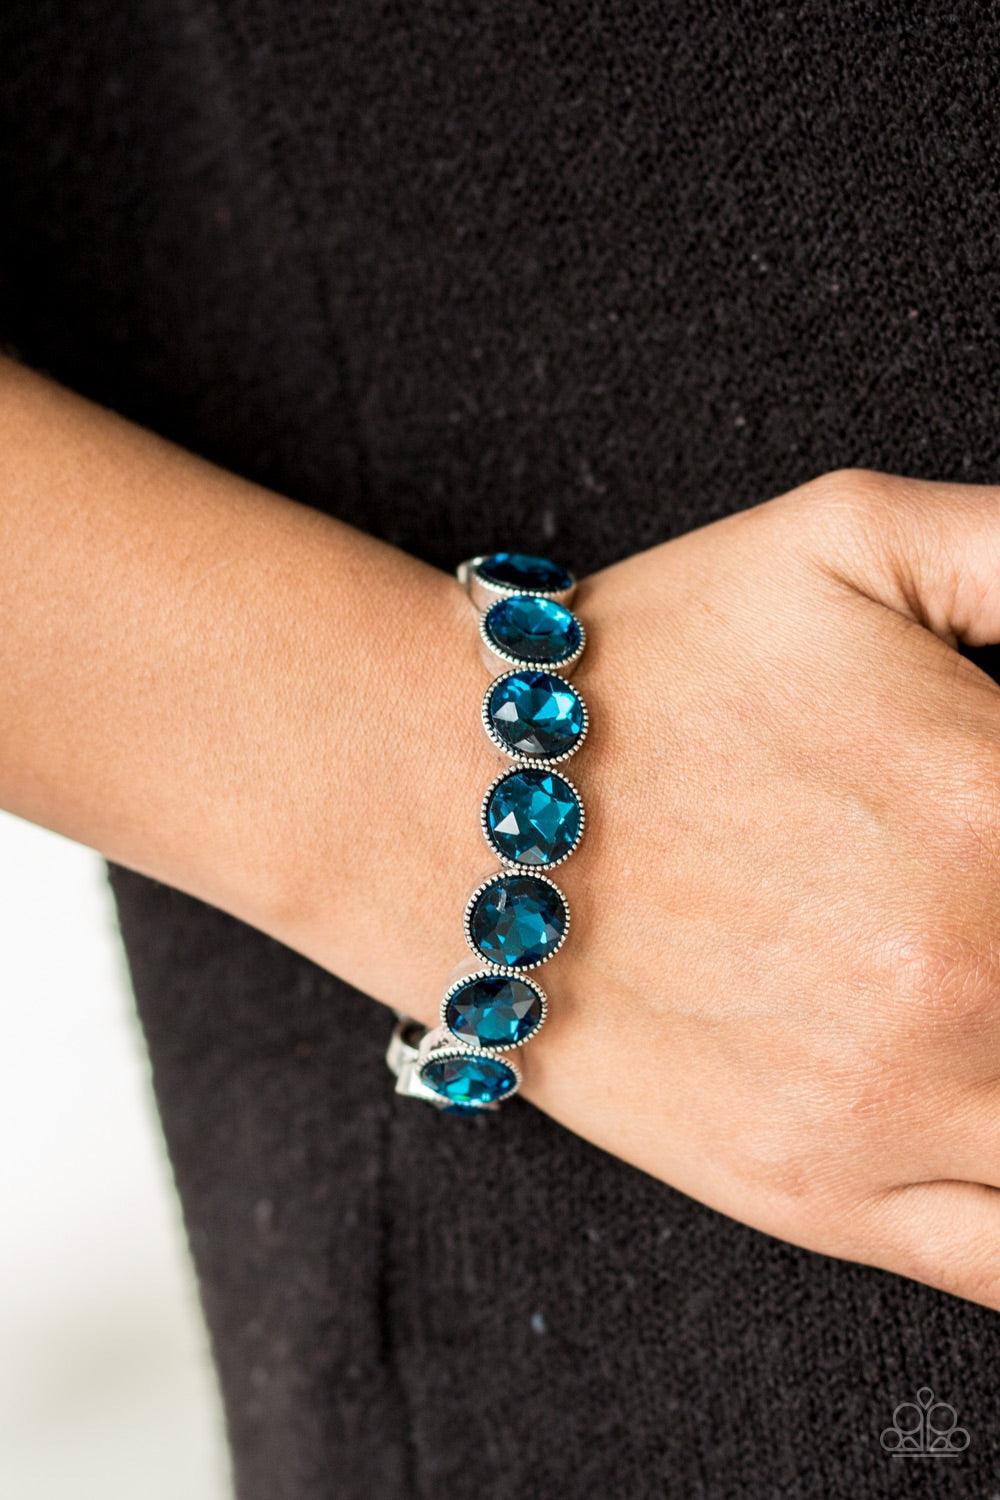 Paparazzi Accessories Number One Knockout - Blue Faceted blue gems are pressed into sleek silver frames. The glittery frames are threaded along elastic stretchy bands, creating a glamorous look around the wrist. Jewelry